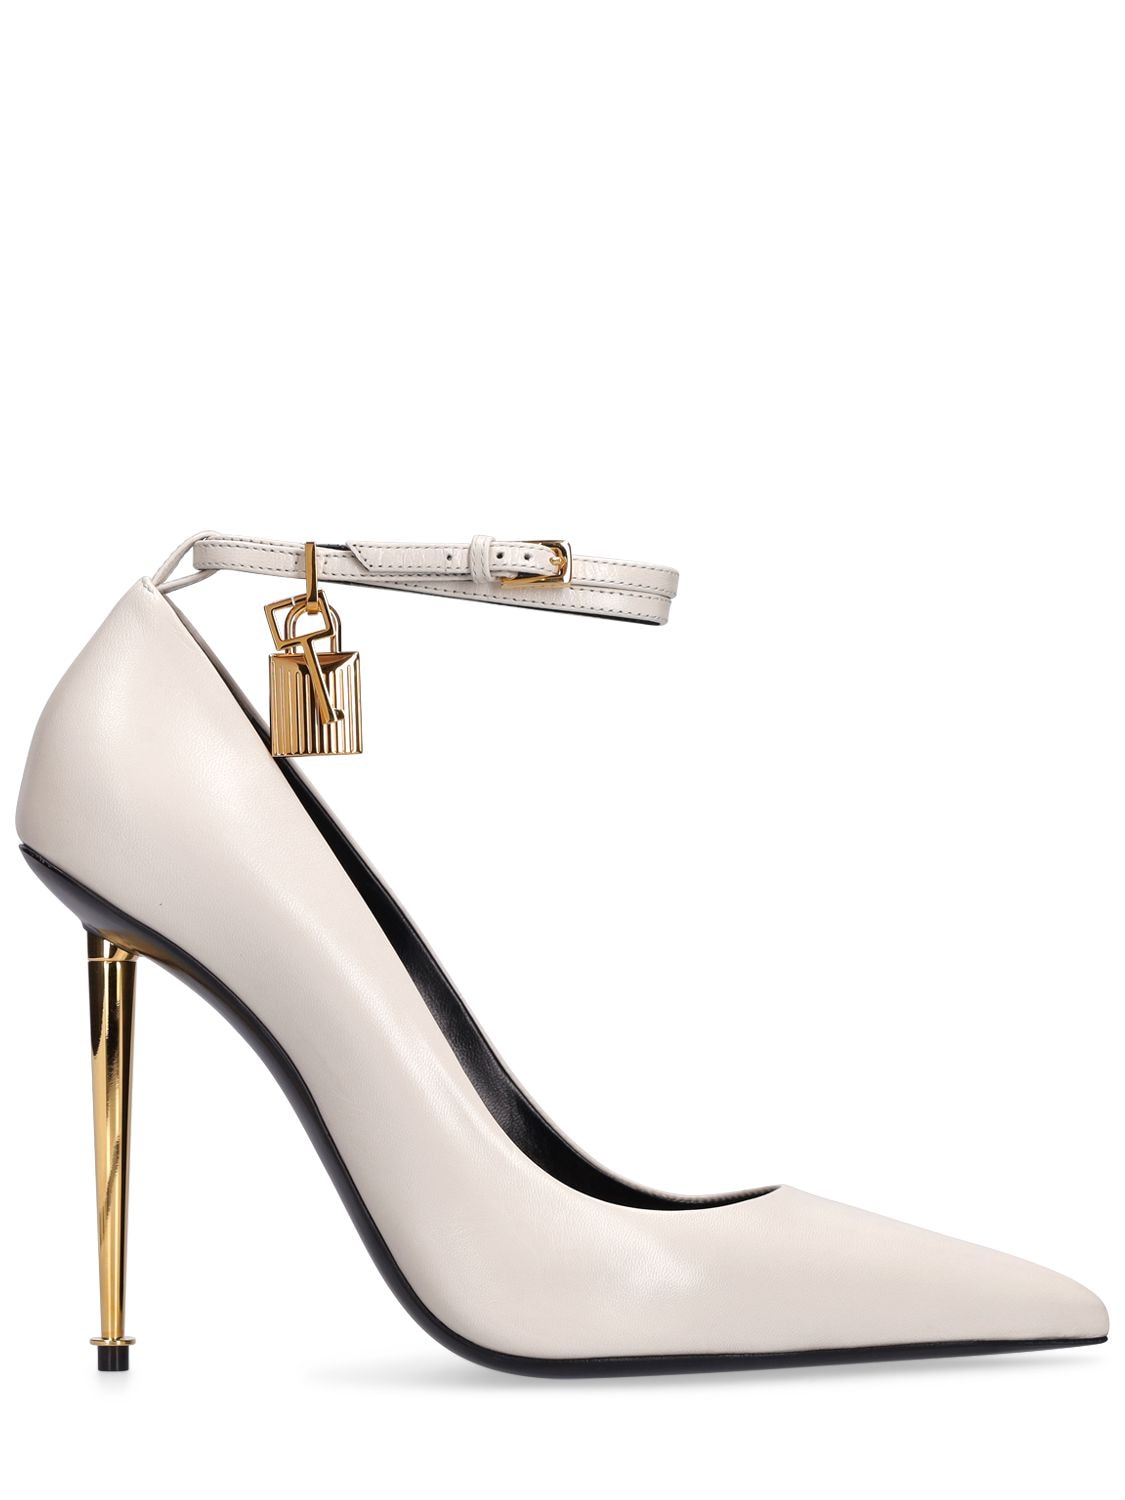 TOM FORD 105mm Padlock Leather Pumps